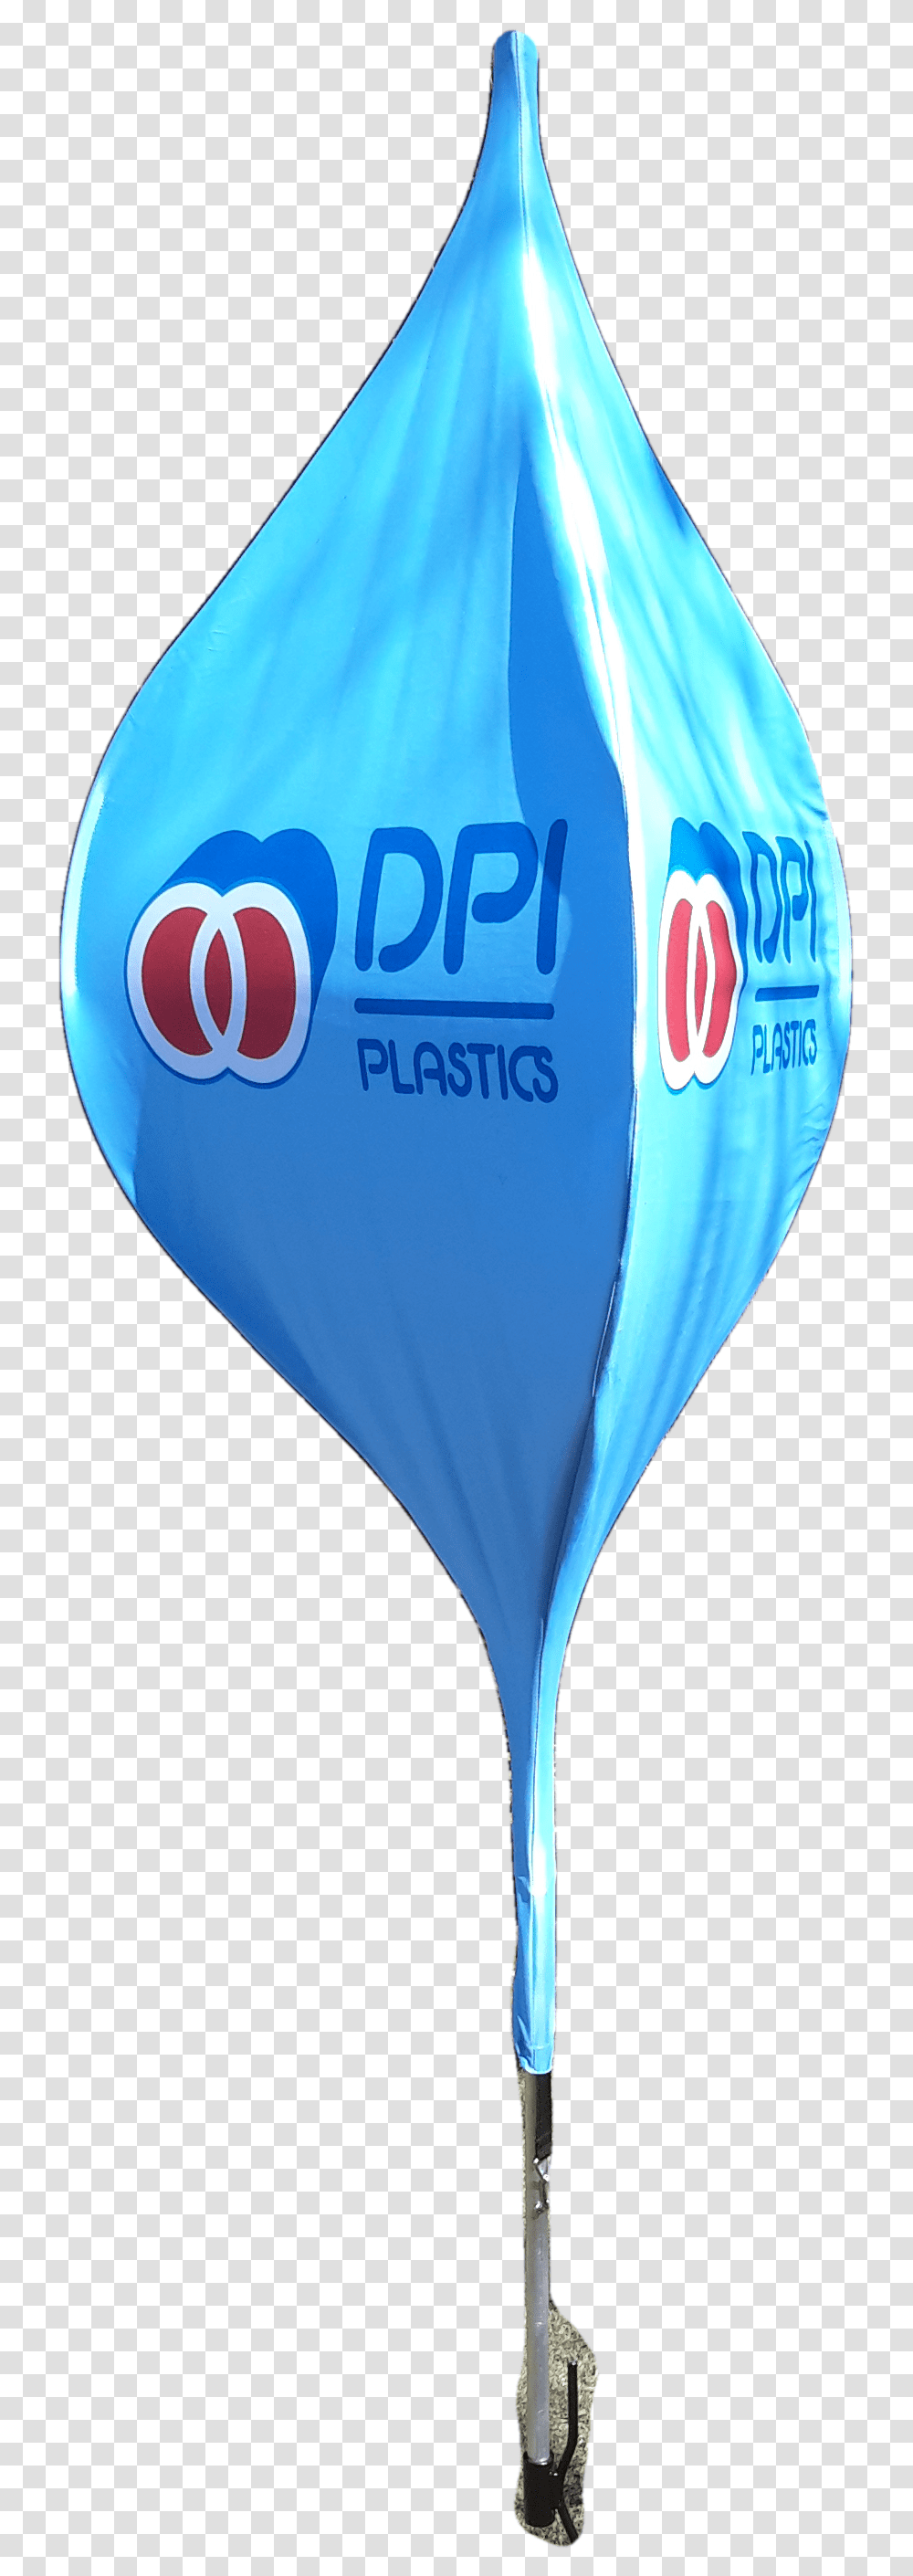 Lantern Banners In South Africa, Ball, Balloon, Flag Transparent Png